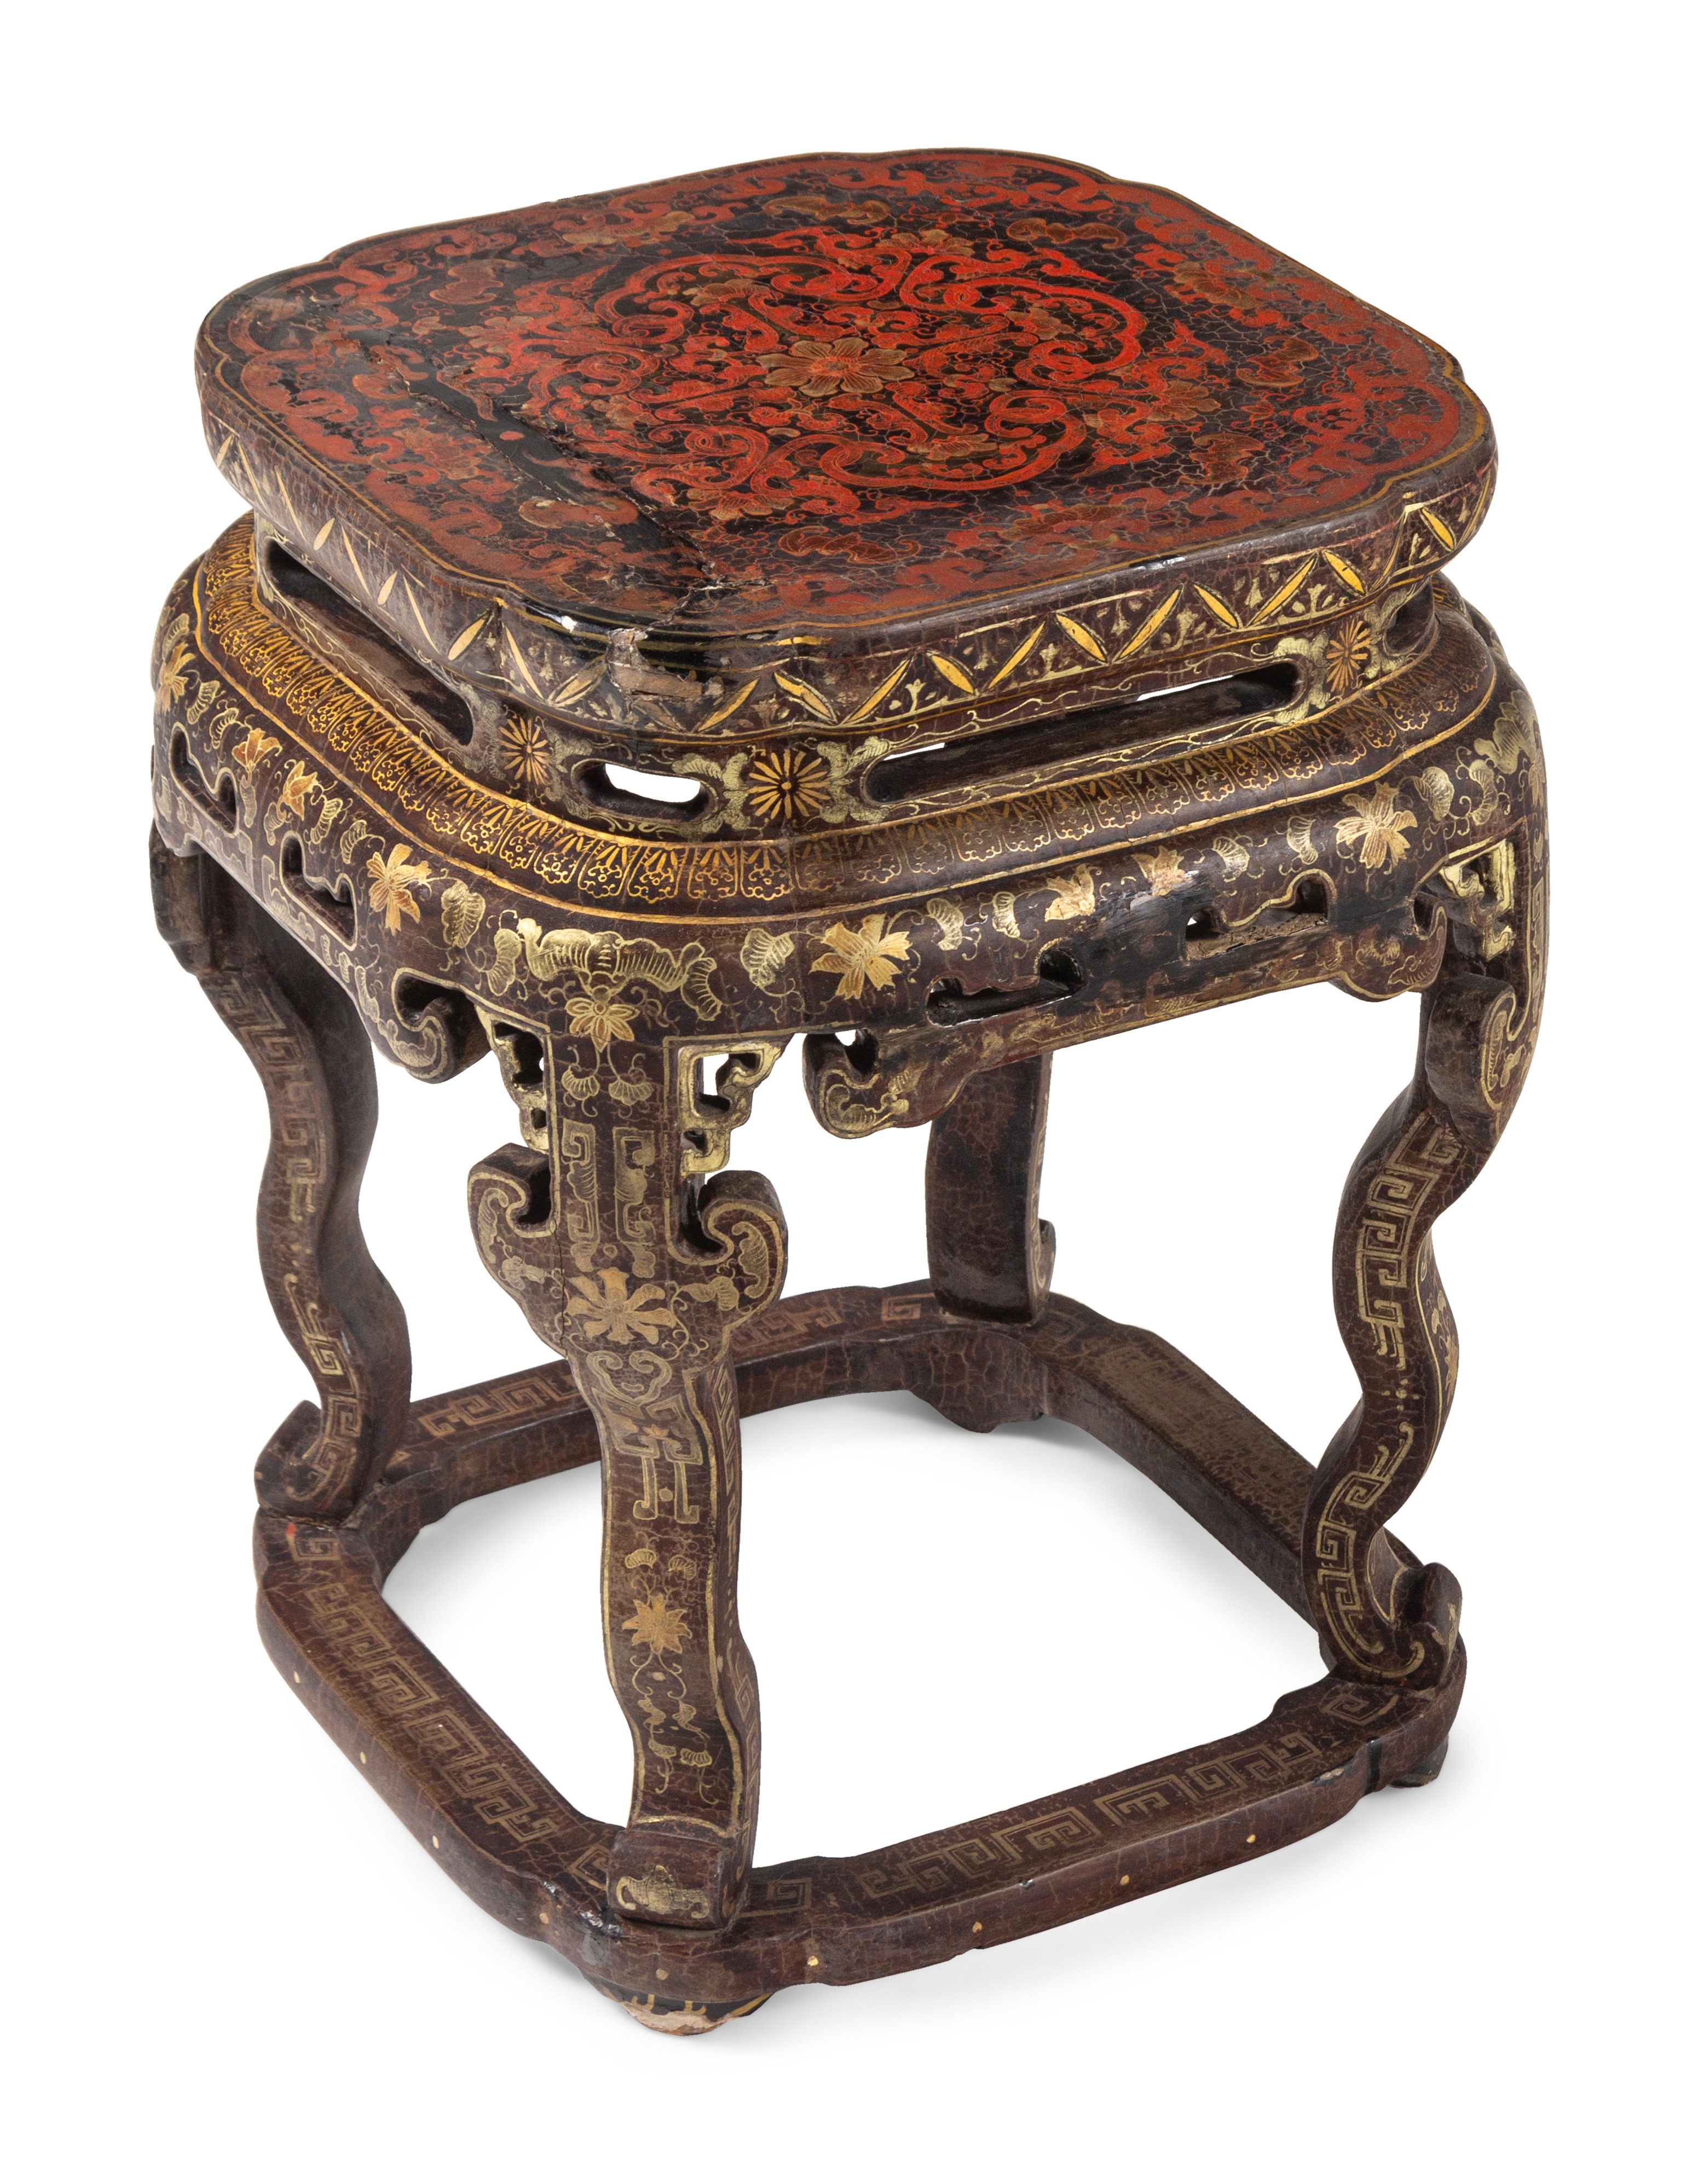 A Pair of Chinese Export Black Lacquer and Parcel-Gilt Low Tables - Image 2 of 4